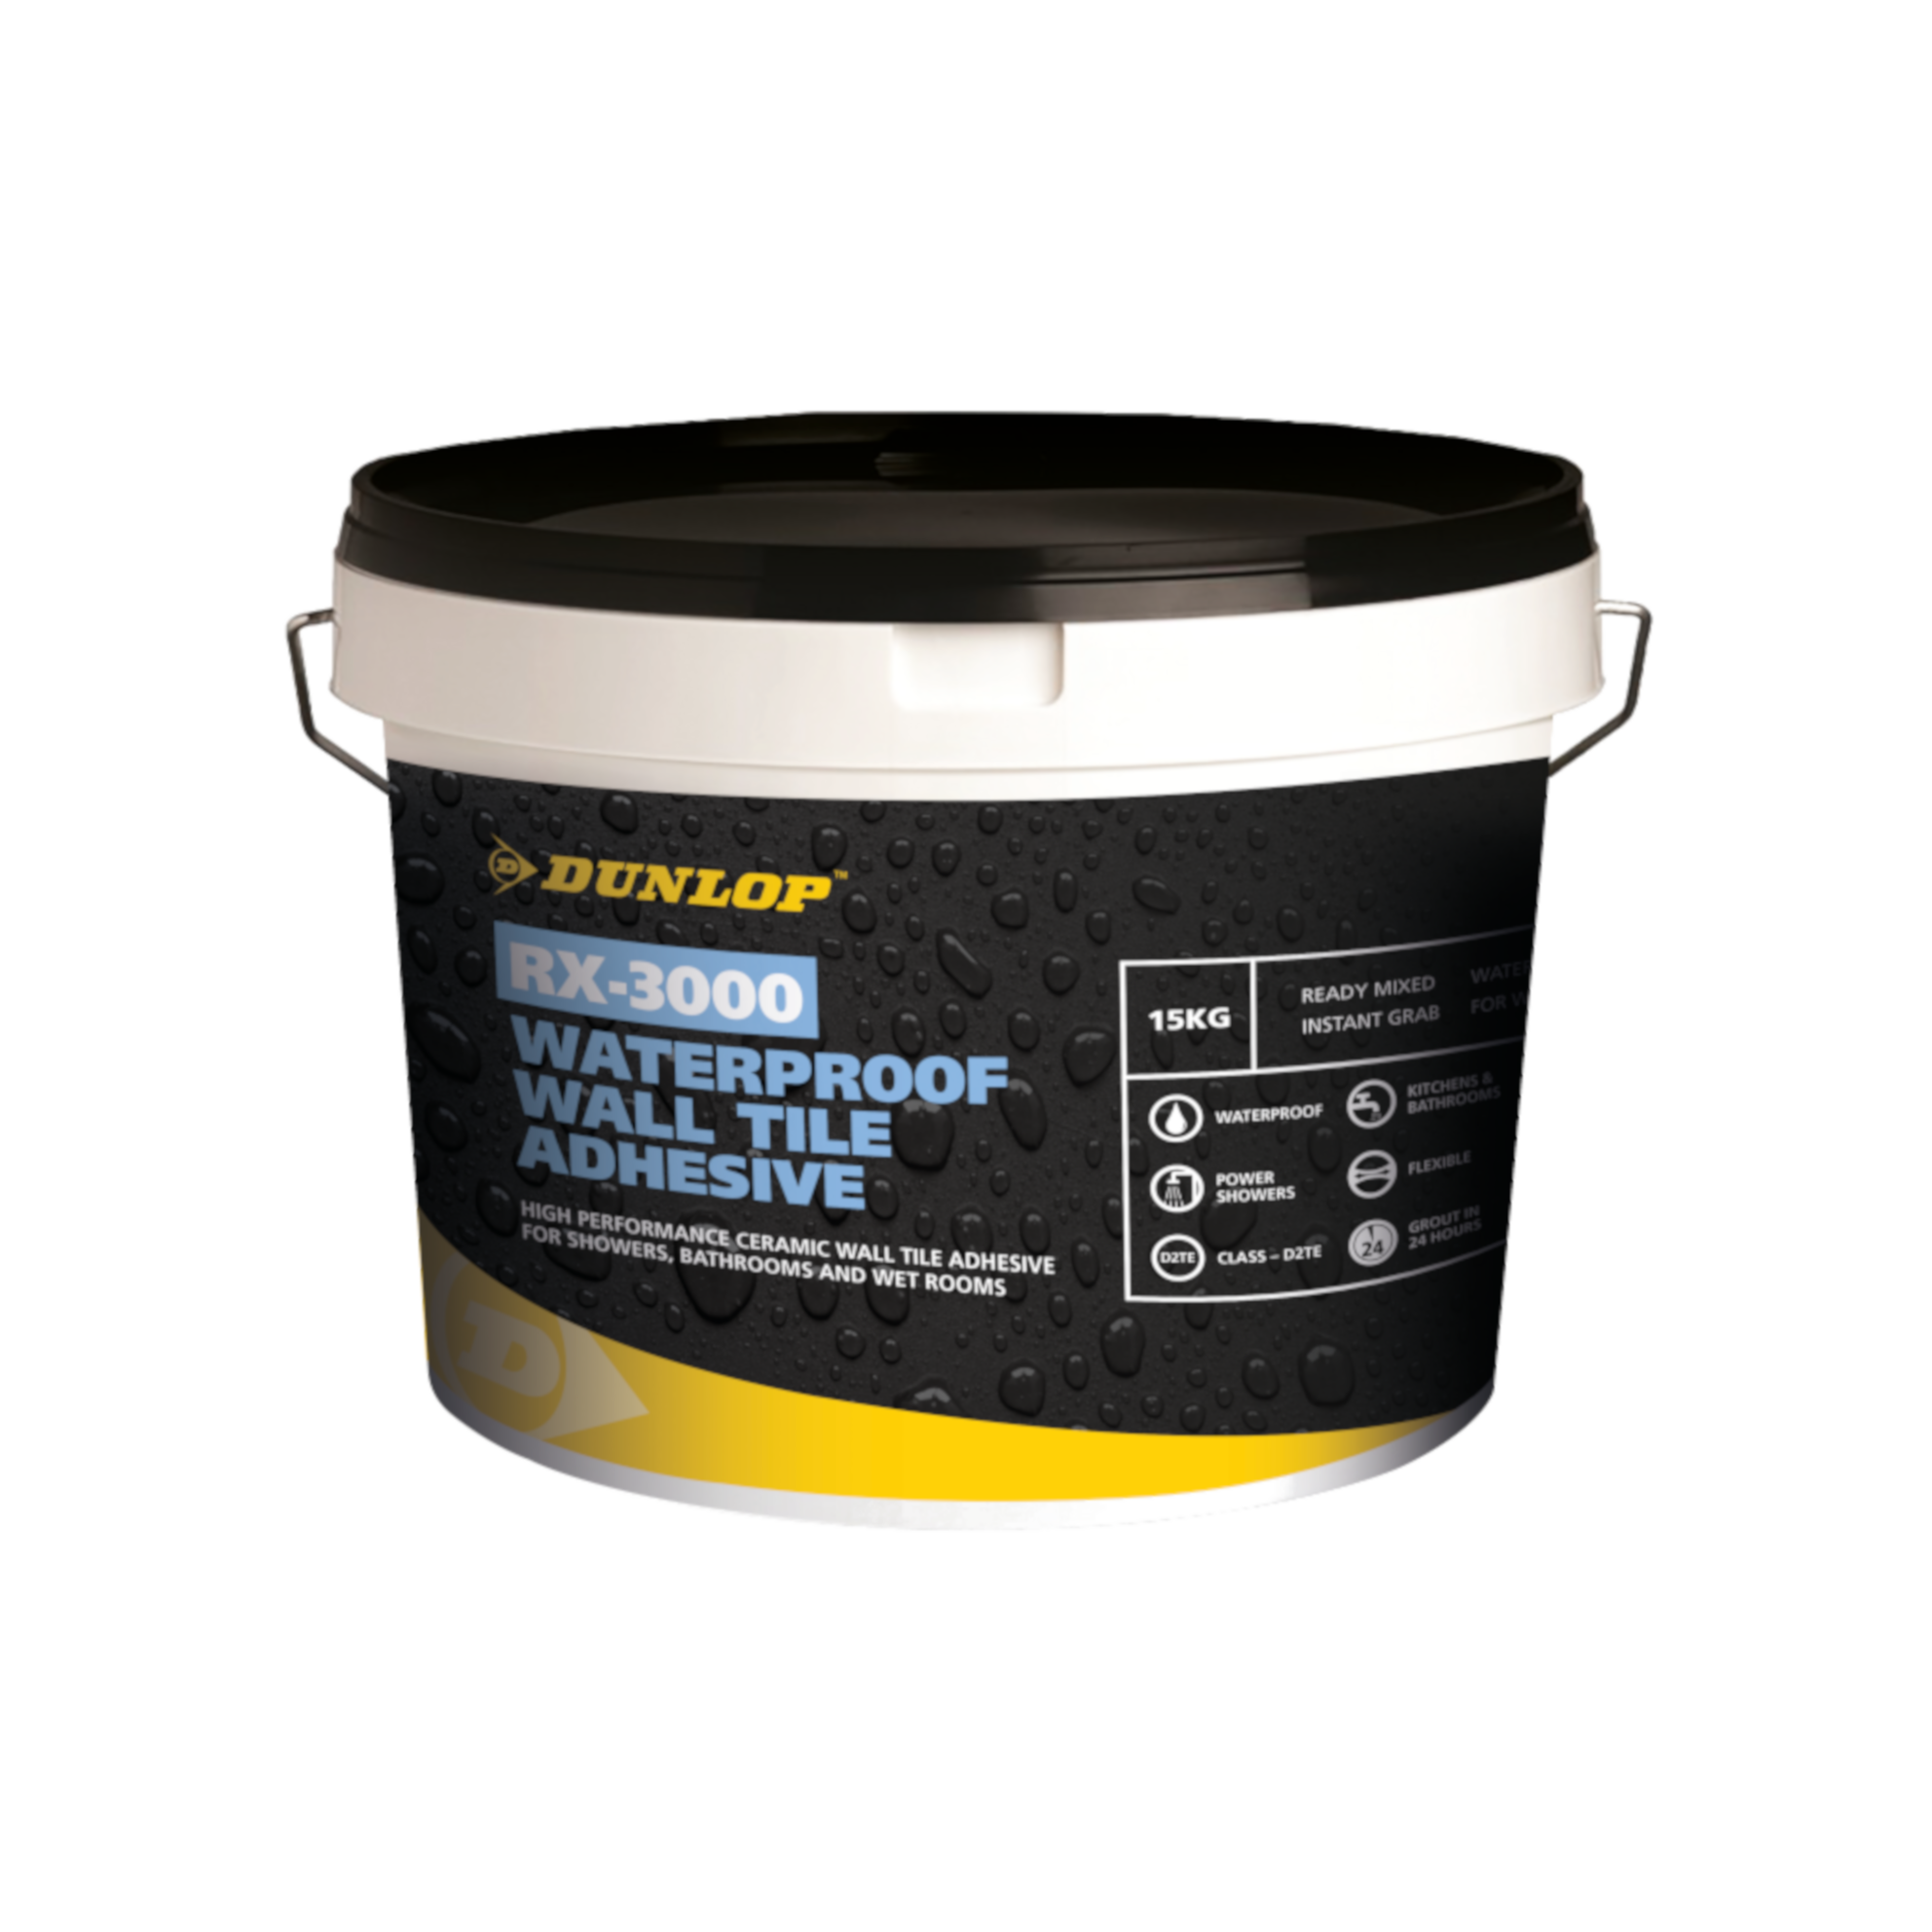 https://dunloptrade.com/wp-content/uploads/2018/07/RX-3000-Waterproof-Wall-Tile-Adhesive-15kg-1.png